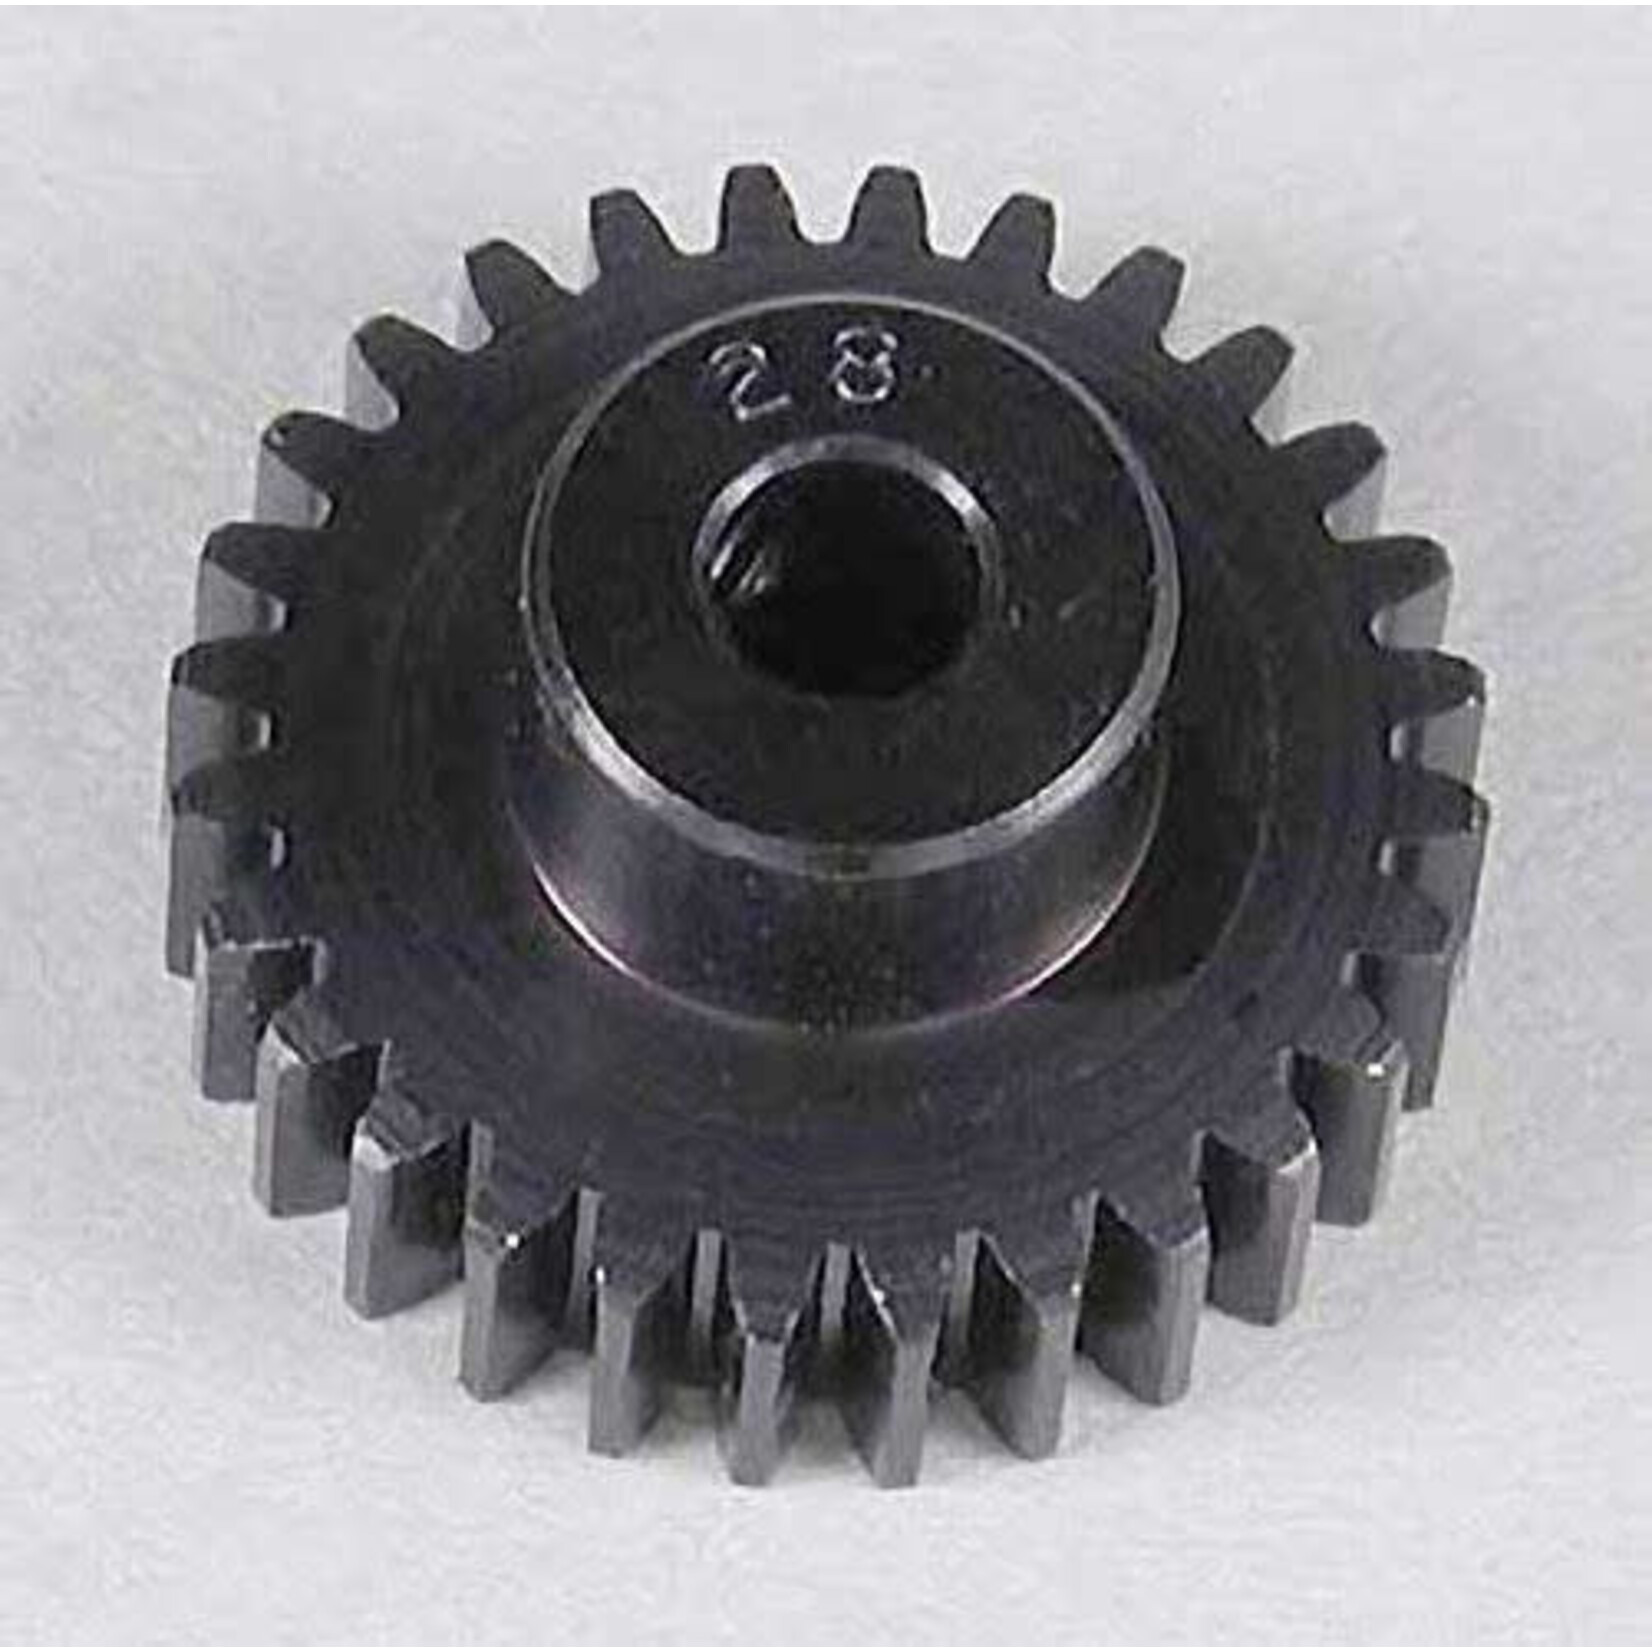 Robinson Racing Products (RRP) 48P Hard Coated Aluminum Pinion Gear, 28T